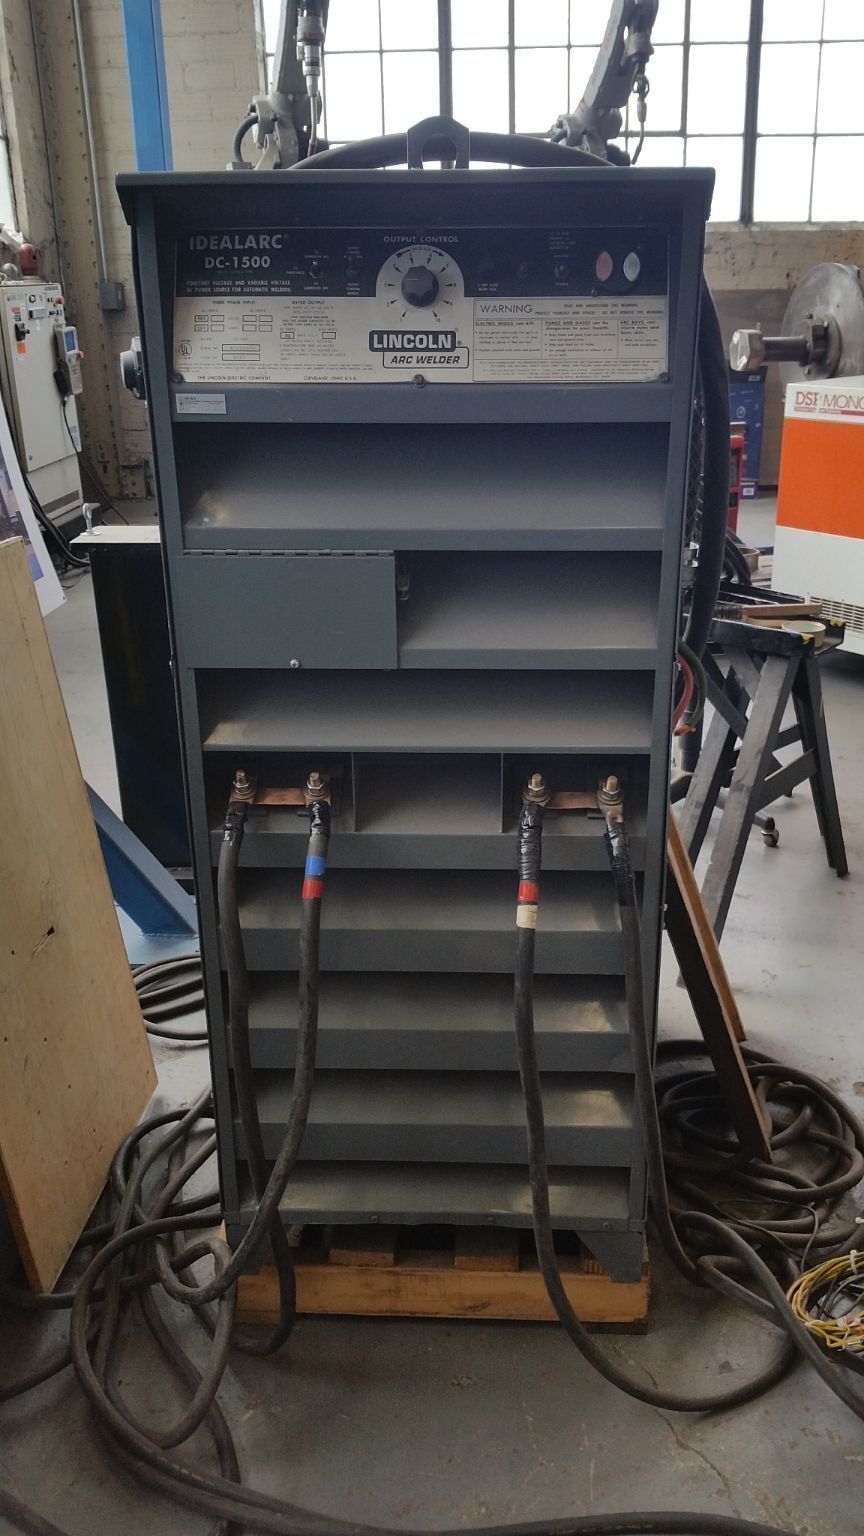 THE LINCOLN ELECTRIC COMPANY IDEALARC DC-1500 SUBARC WELDER Sold Equipment | MD Equipment Services LLC